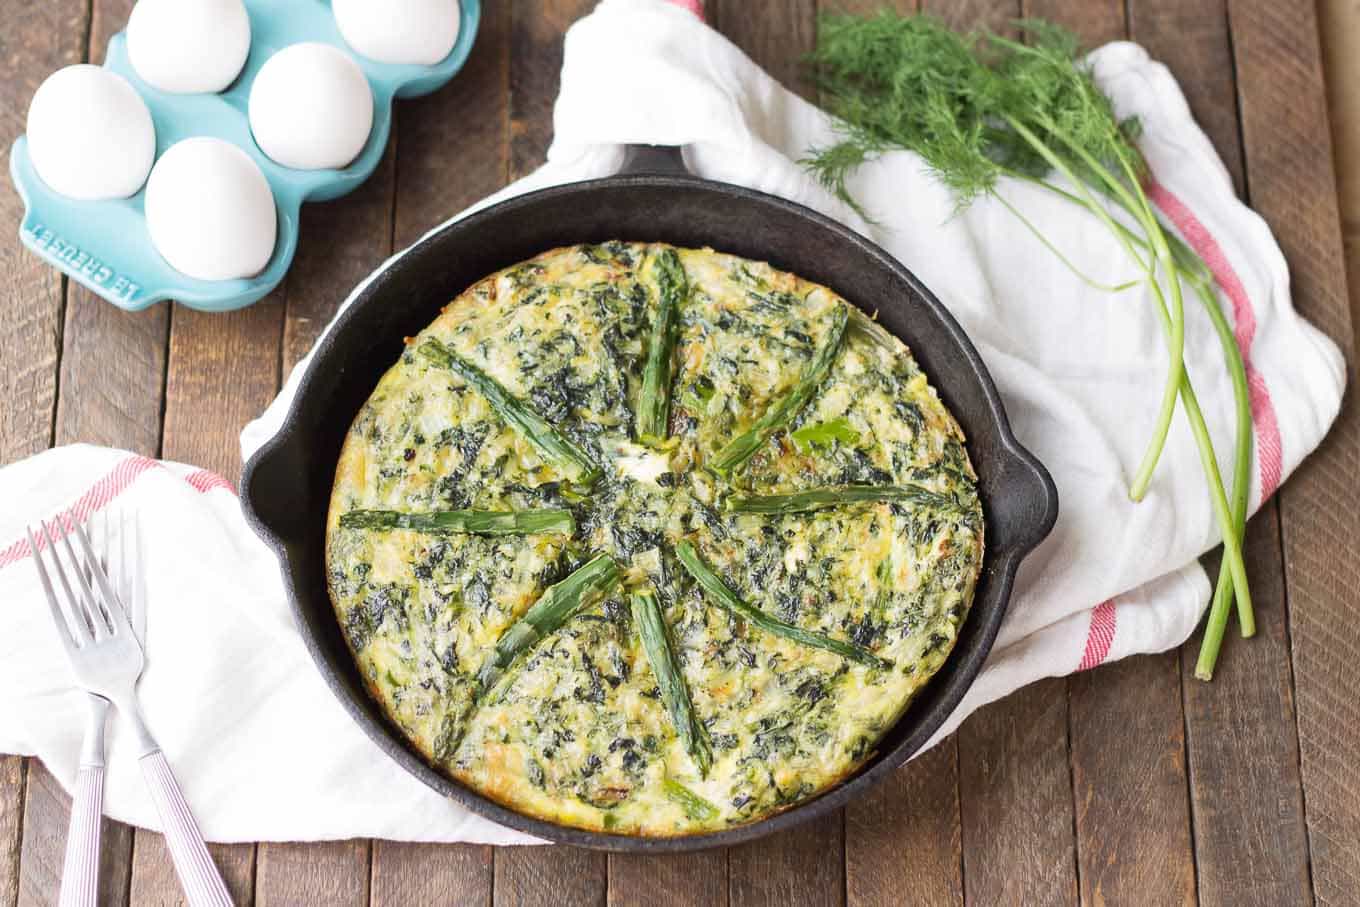 Bursting with springtime flavors, this Asparagus and Spinach Frittata is the perfect dish to wake up to in the morning. Fresh asparagus, spinach and tangy goat cheese pair nicely to give you a healthy balanced breakfast, snack or meal any time | Strawberry Blondie Kitchen